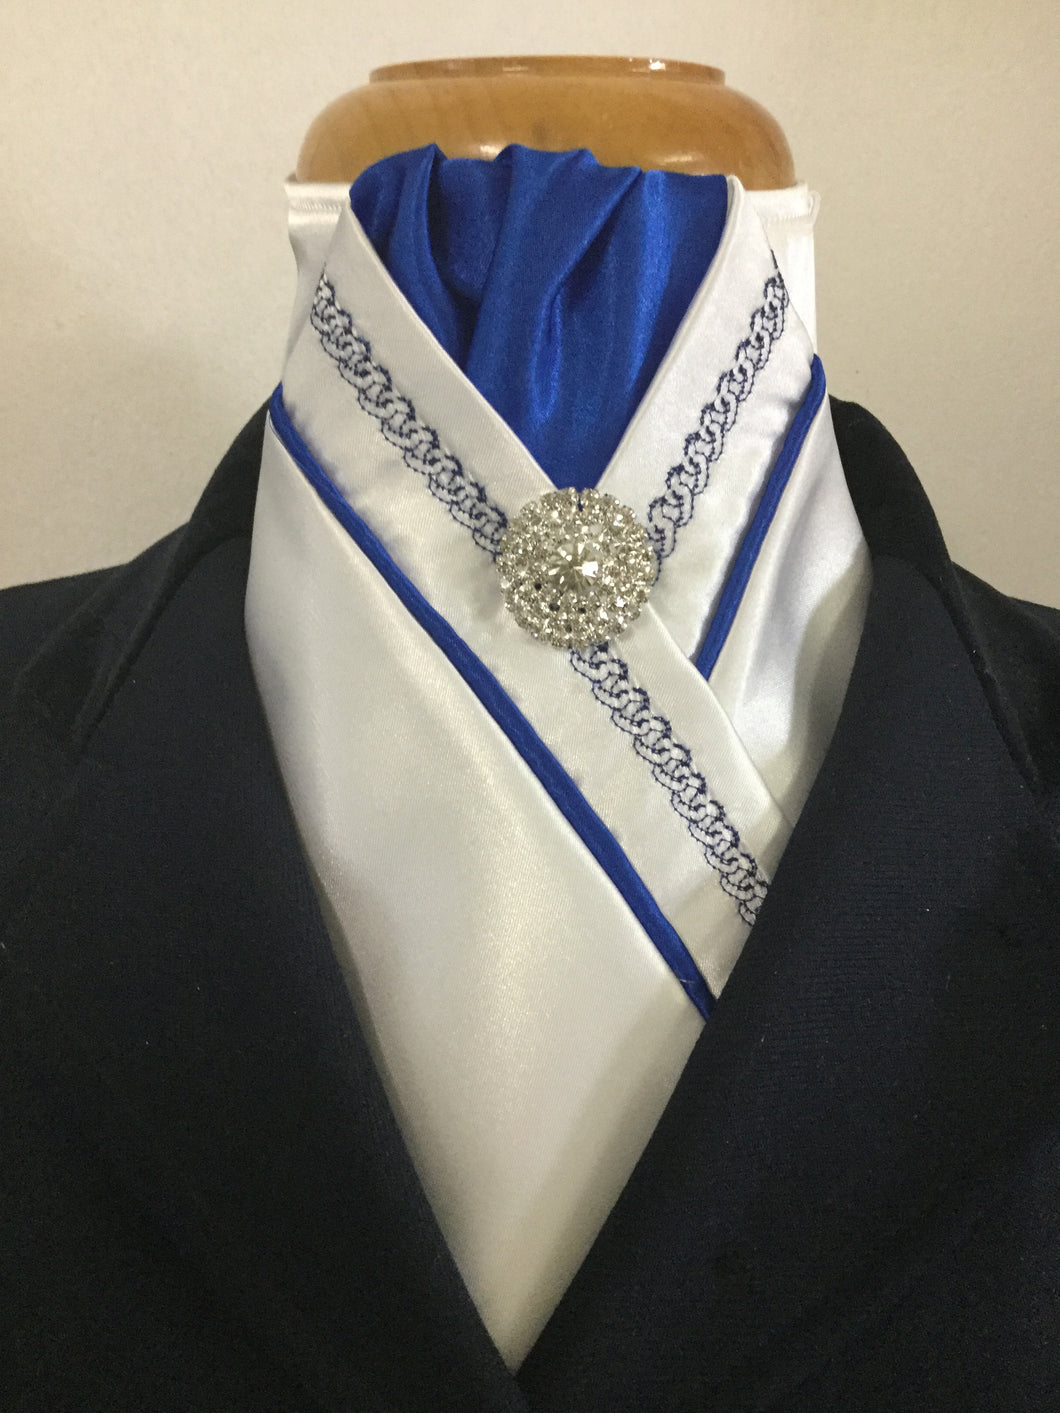 HHD Pretied Stock Tie White Satin Royal Blue Chain Embroidered